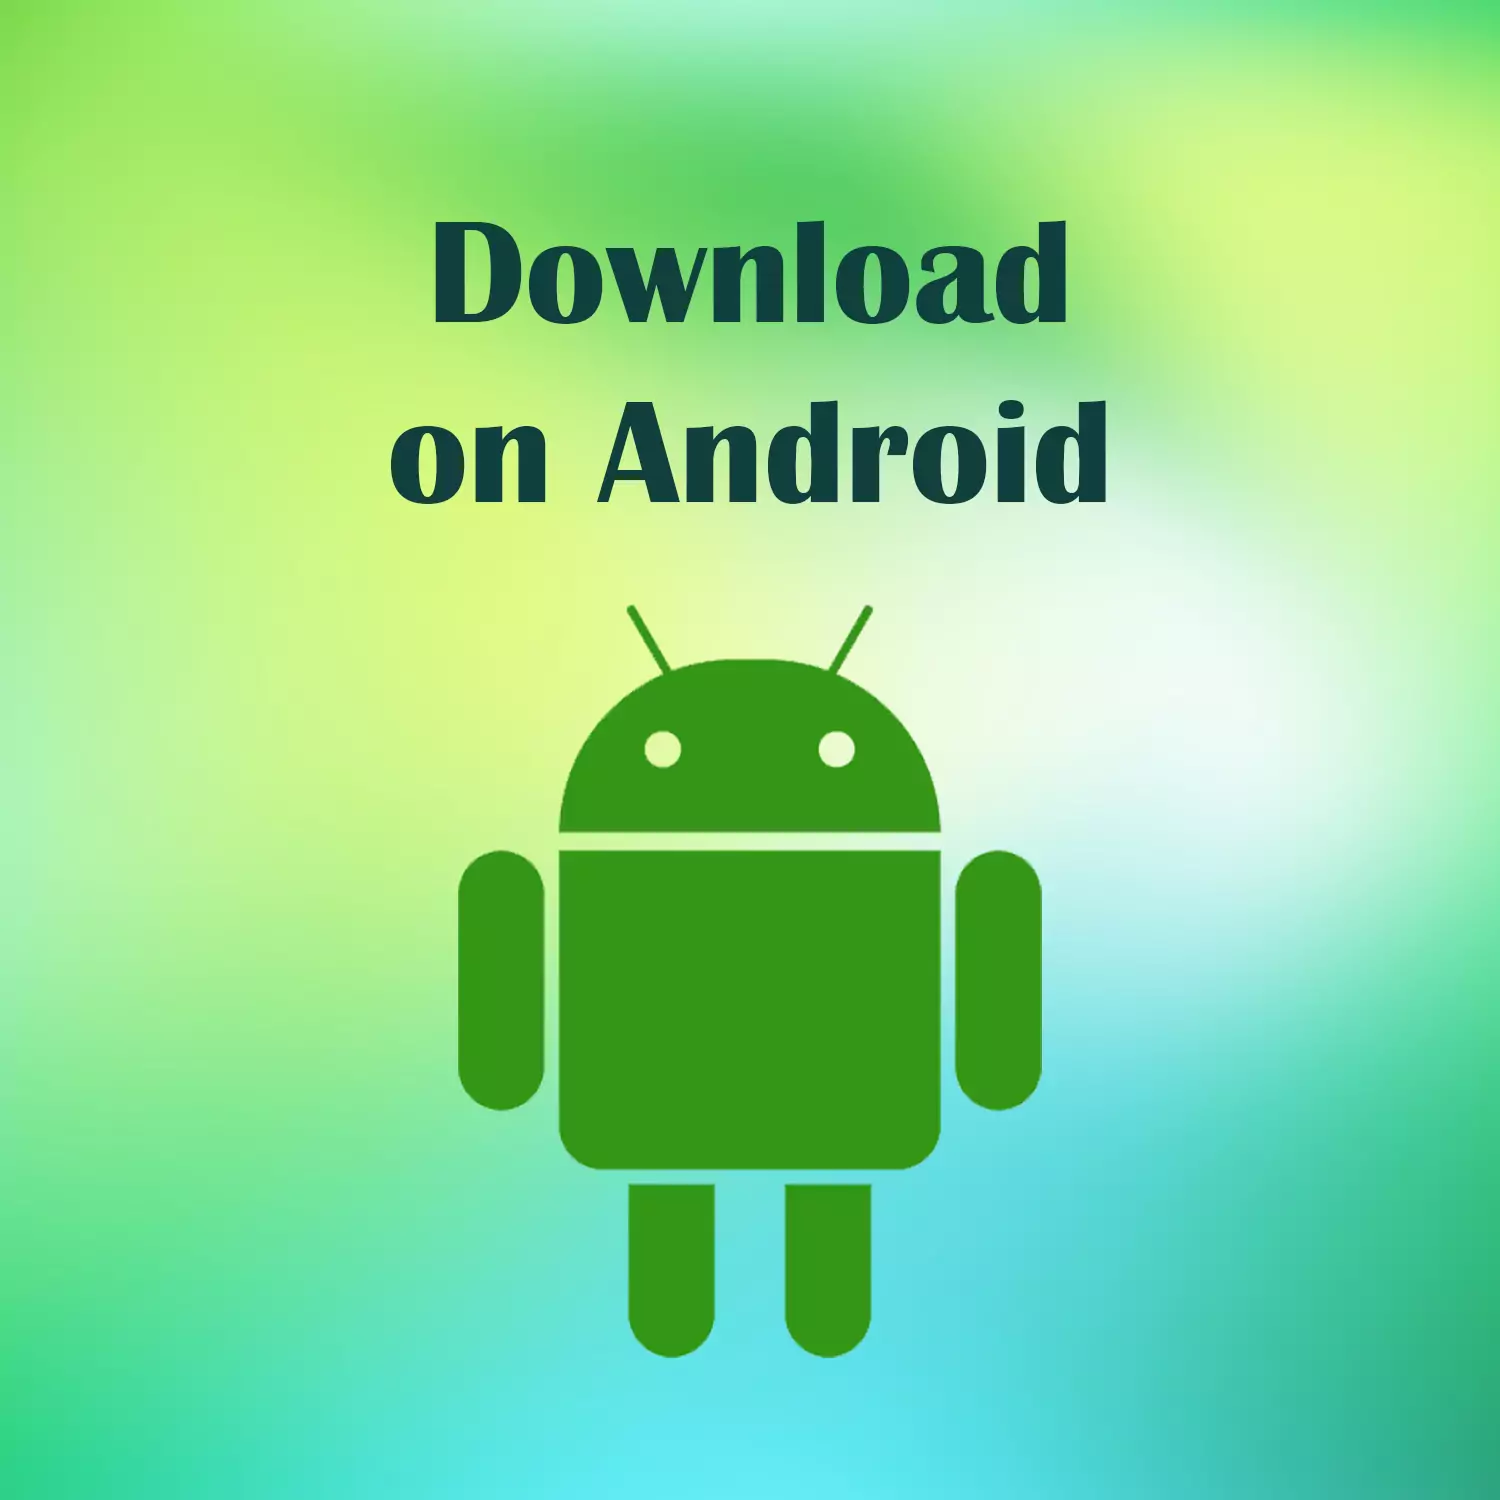 Use these instructions to download the cricket betting app for Android.